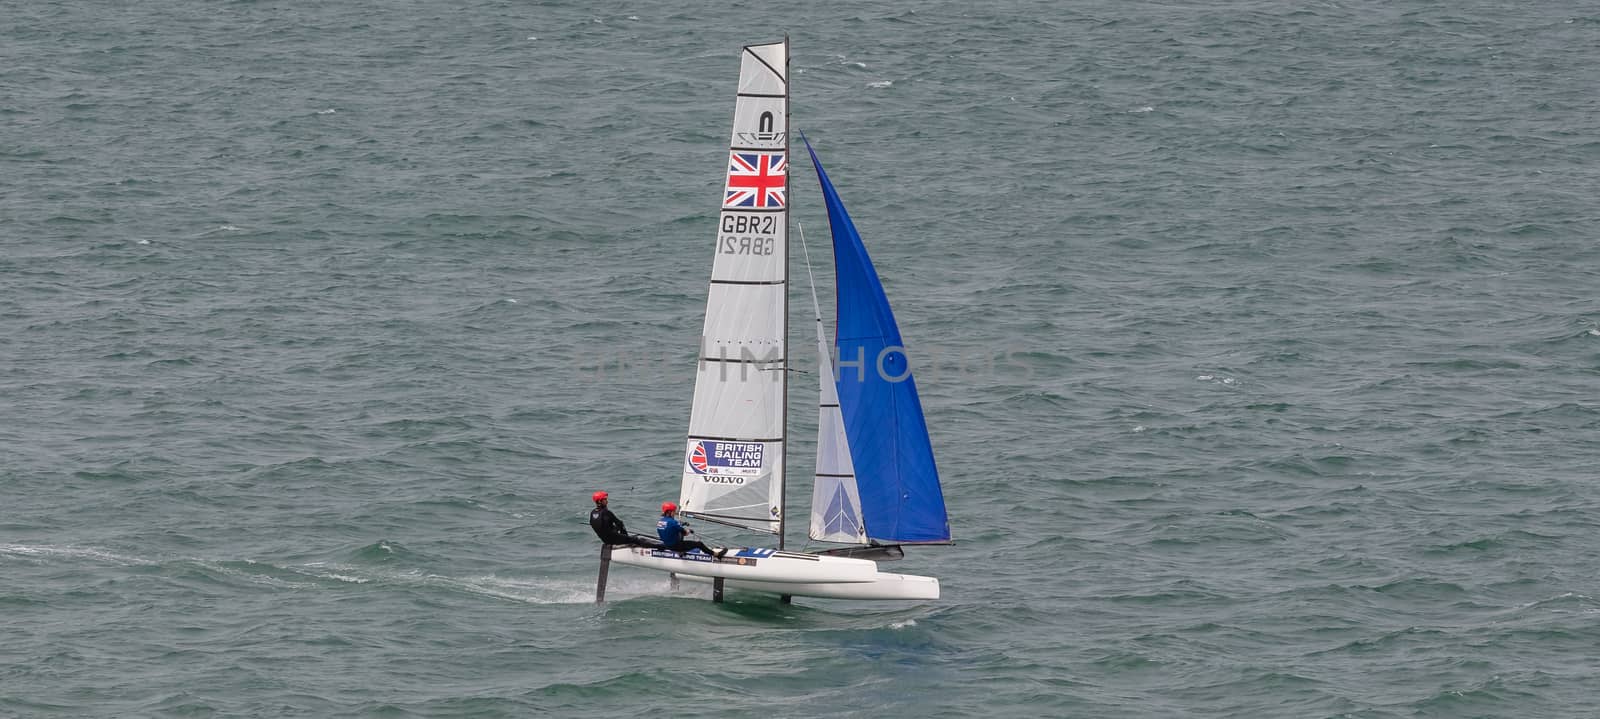 Portland harbour, United Kingdom - July 1, 2020: High Angle aerial panoramic shot of racing catamaran of the British Sailing Team. Two sailors on it wearing red helmets, British flag on the sails.